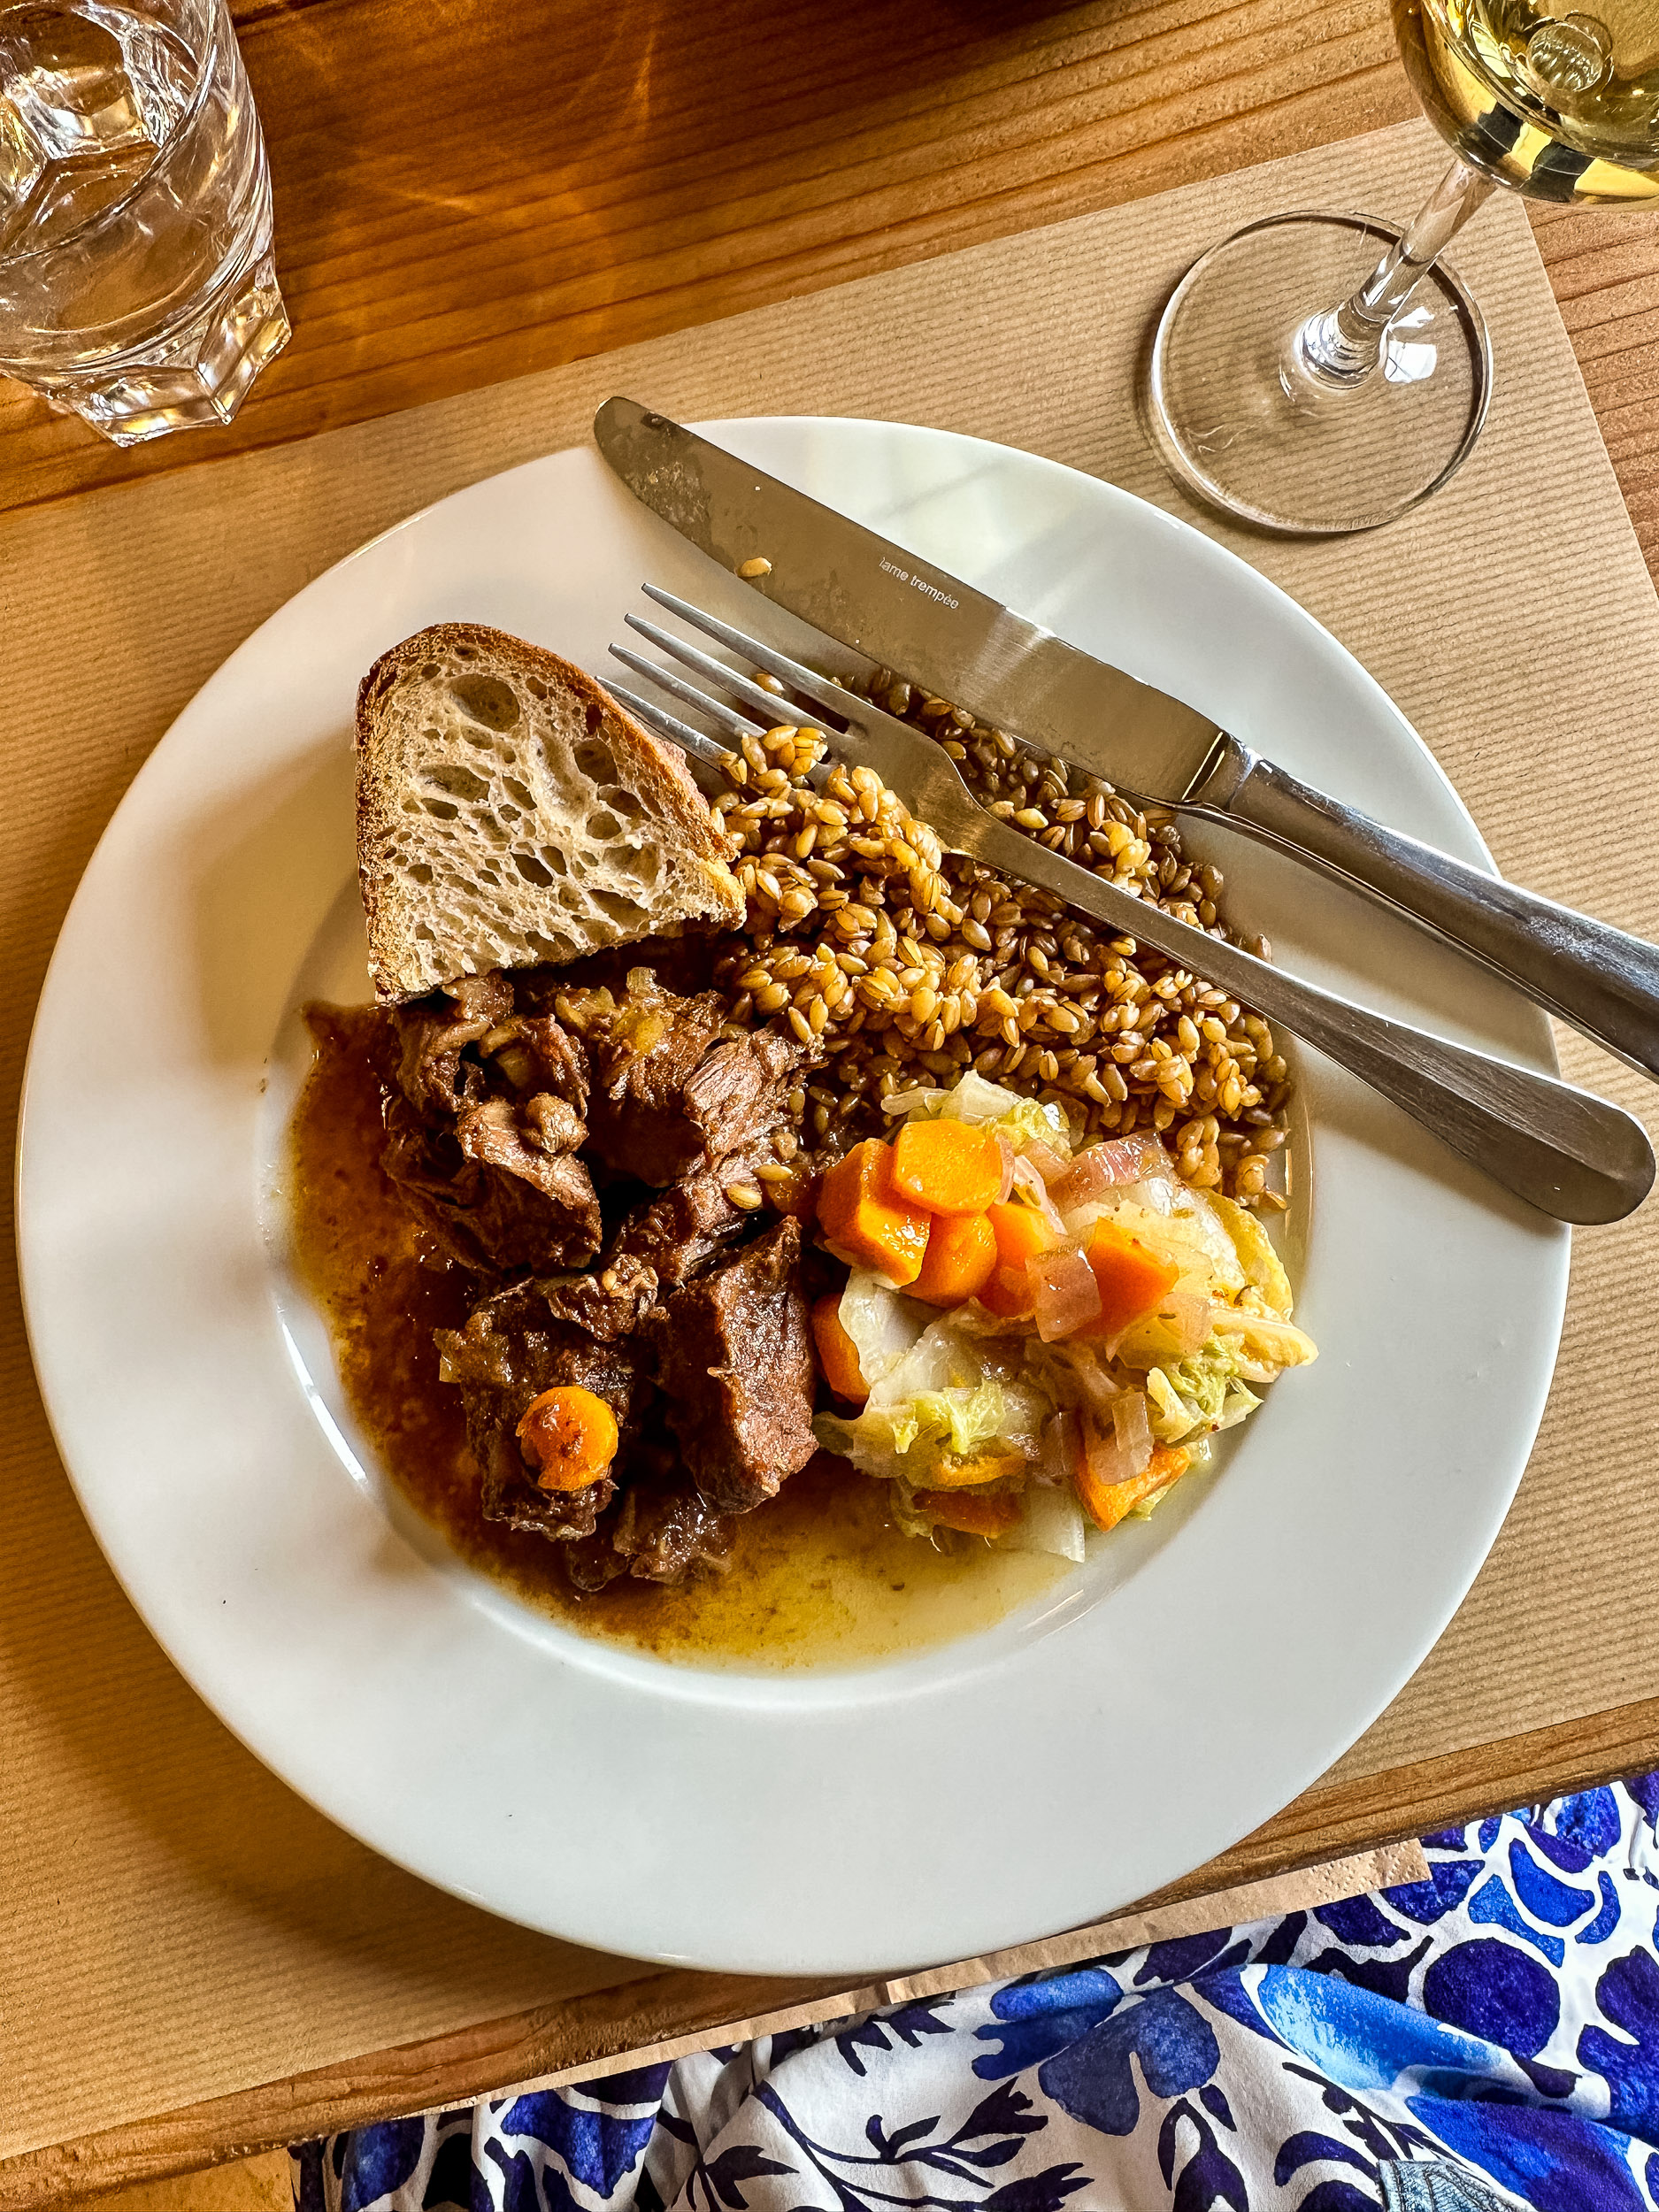 Rustic French lunch of beef stew, steamed organic garden vegetables of carratos and cabbage, farro, and homemade bread.